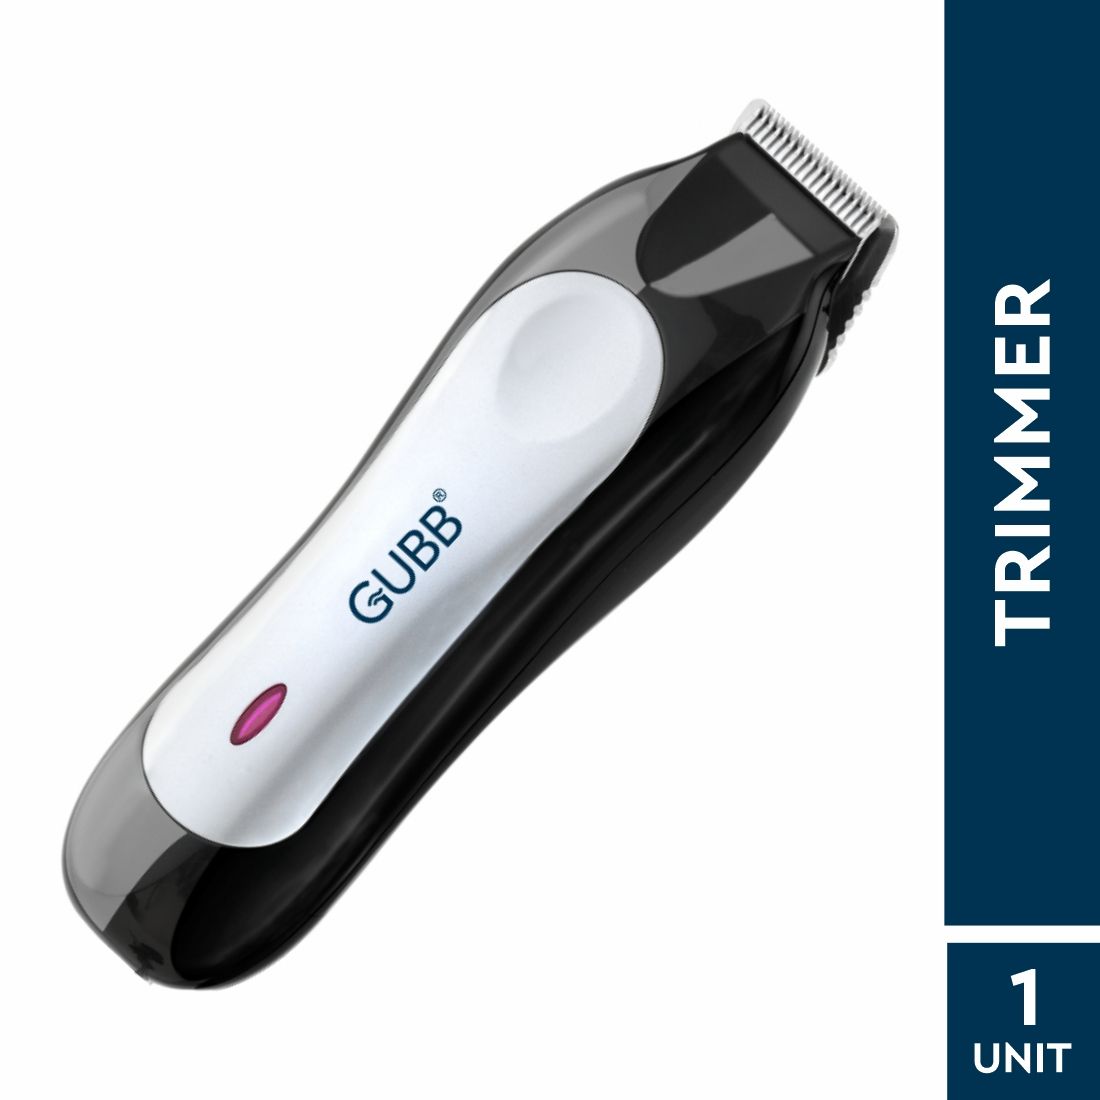 GUBB GB-9018 Instant Skin protecting Beard Trimmer - 360 Degrees Rotating Blades With USB Charging